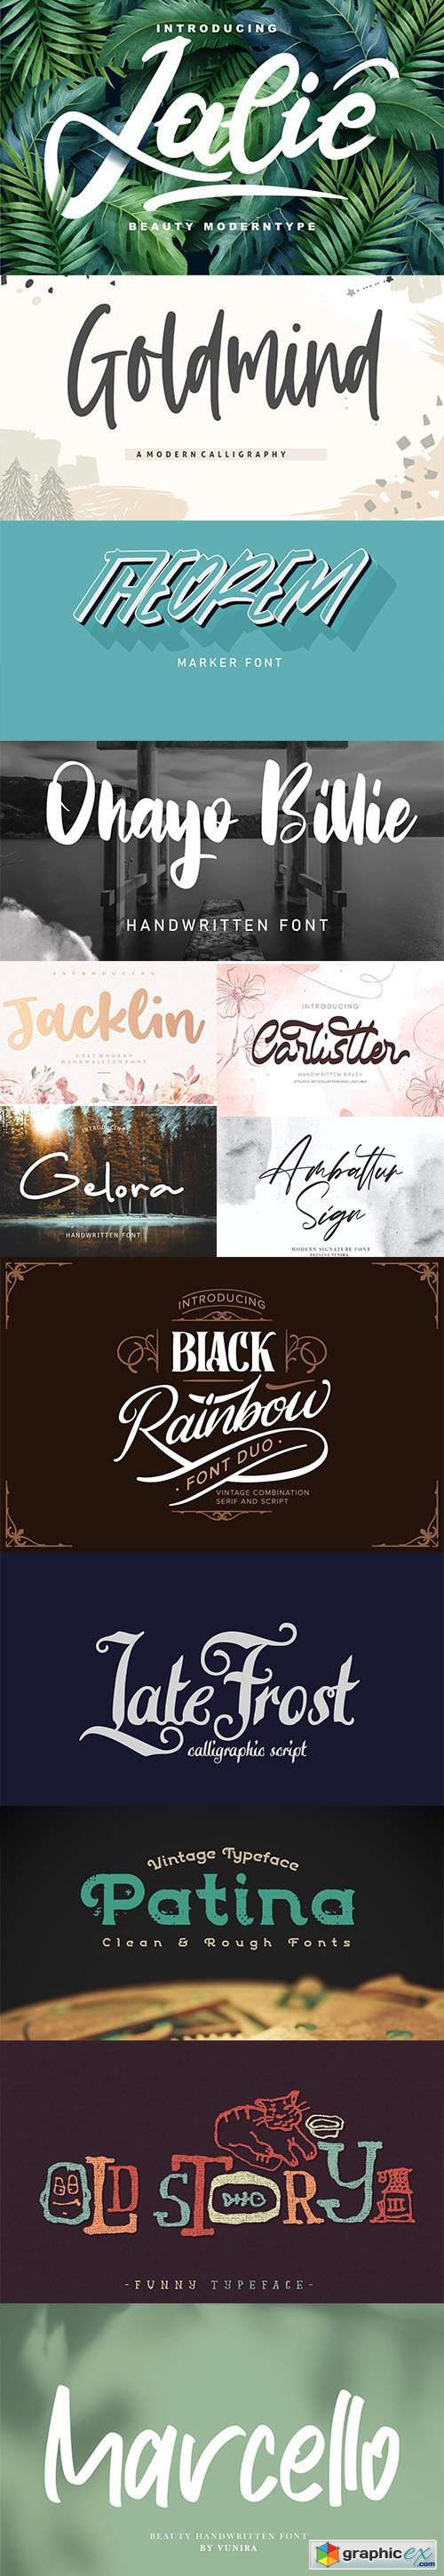  13 Creative Fresh Fonts Collection 